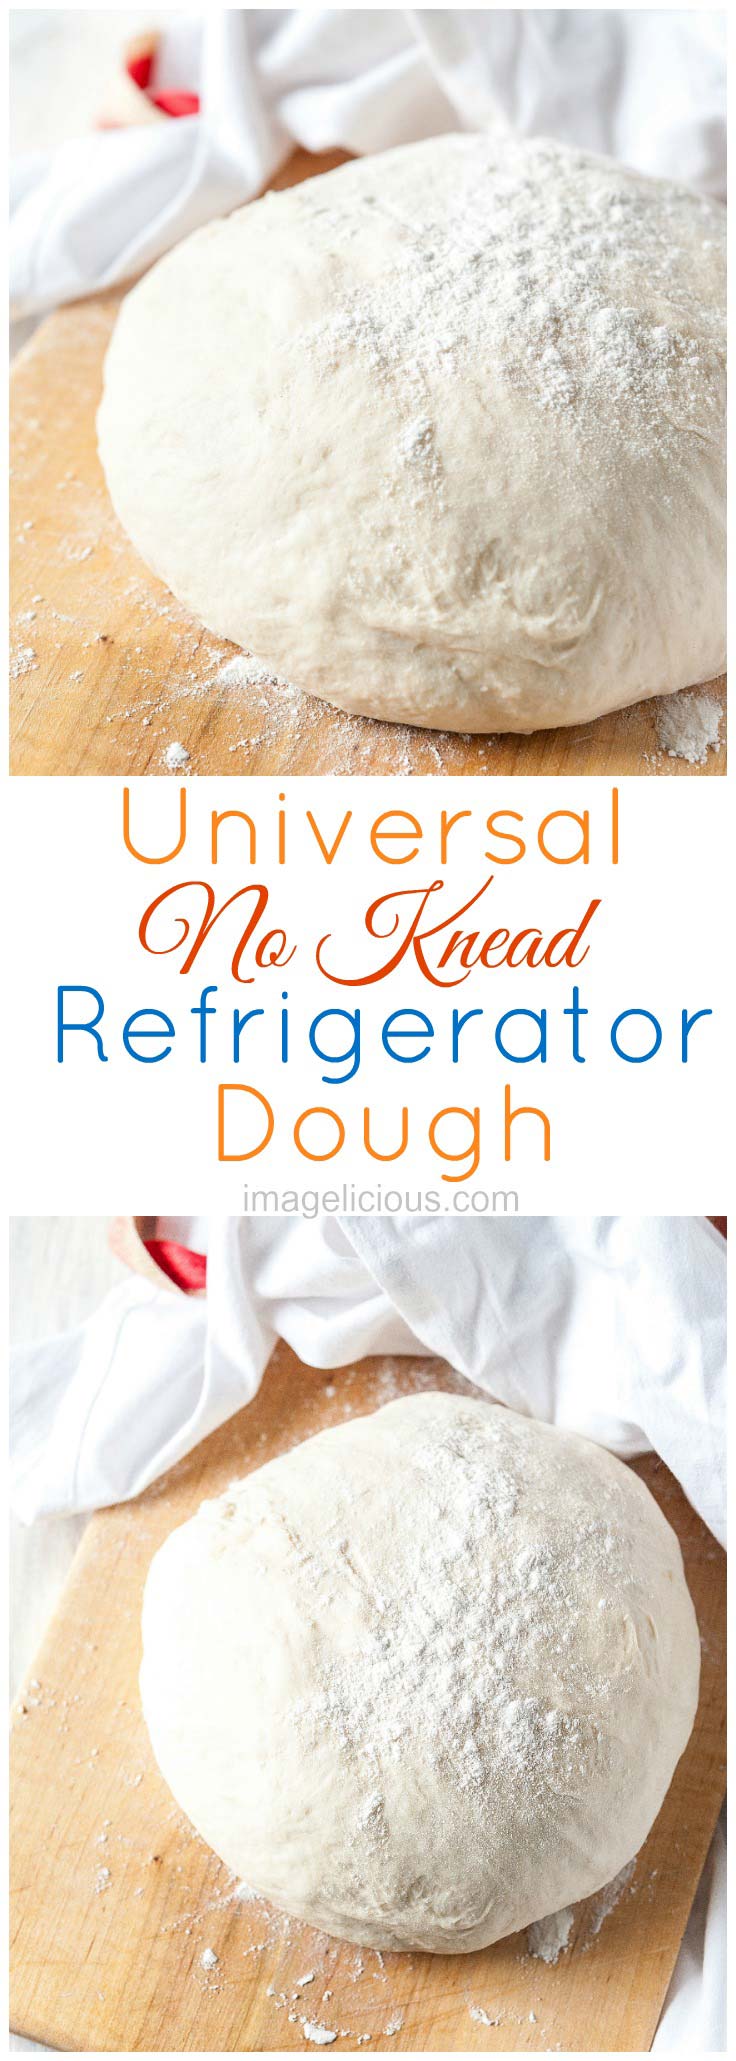 Universal No Knead Refrigerator Dough is very easy to make. You only need 5 minutes to mix all the ingredients with a spoon and then leave the dough in the fridge or overnight. It can be used for rolls, pizza, crescents, or even bagels | Imagelicious